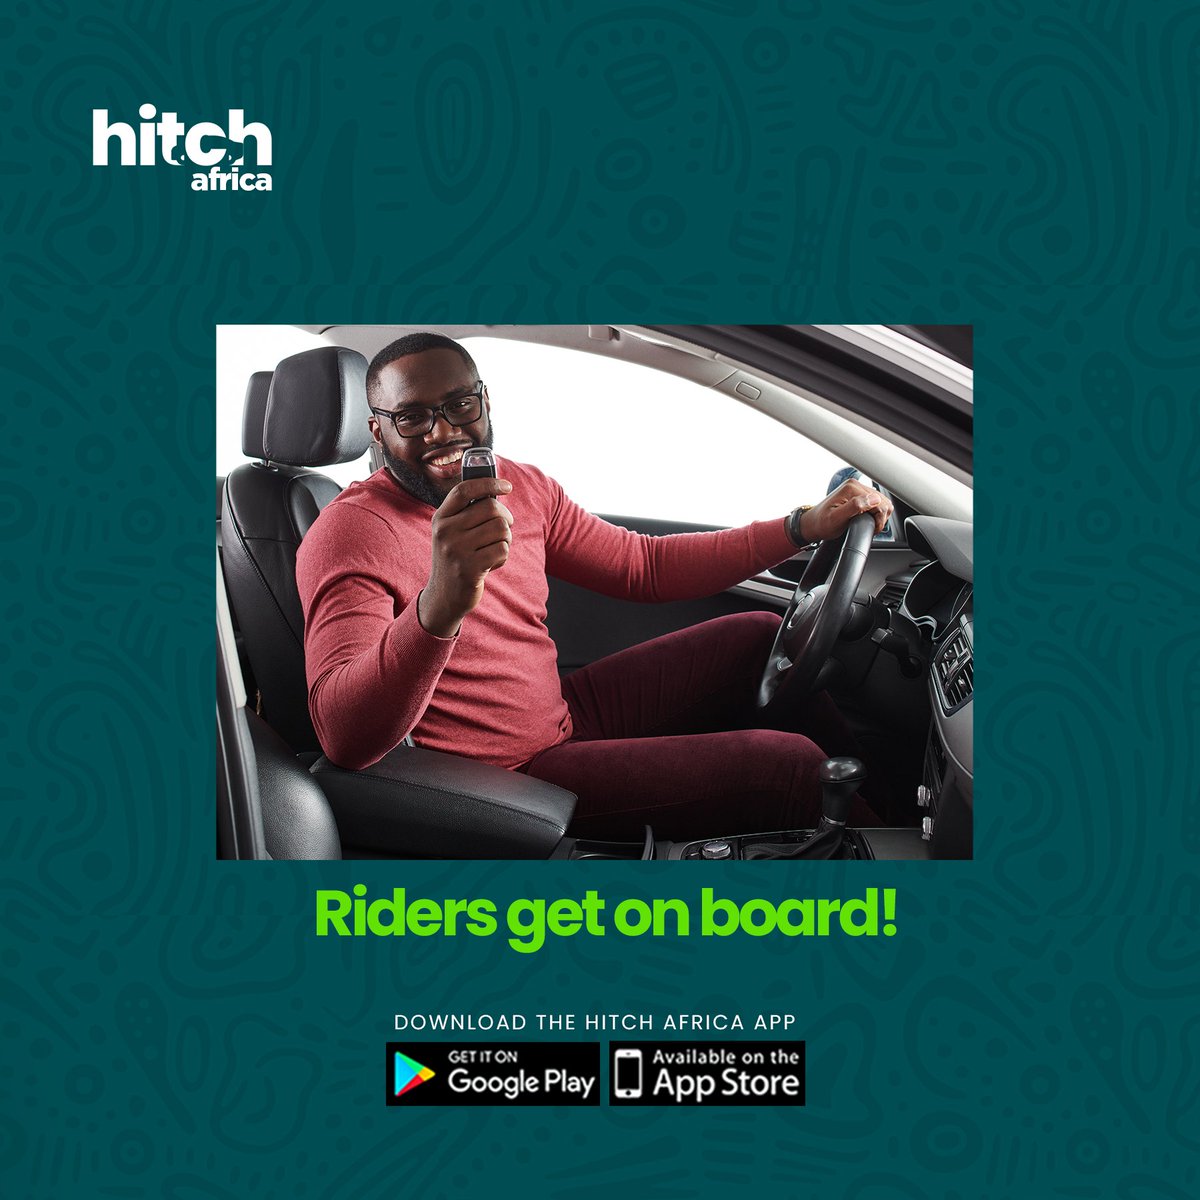 Start your day with a stress-free commute.

Book a ride on Hitch Africa!

Download the Hitch Africa app on the app store or google play store to enjoy secure and affordable rides today😎

#HitchAfrica
#bookaride
#affordablerides
#lagos #Fuel